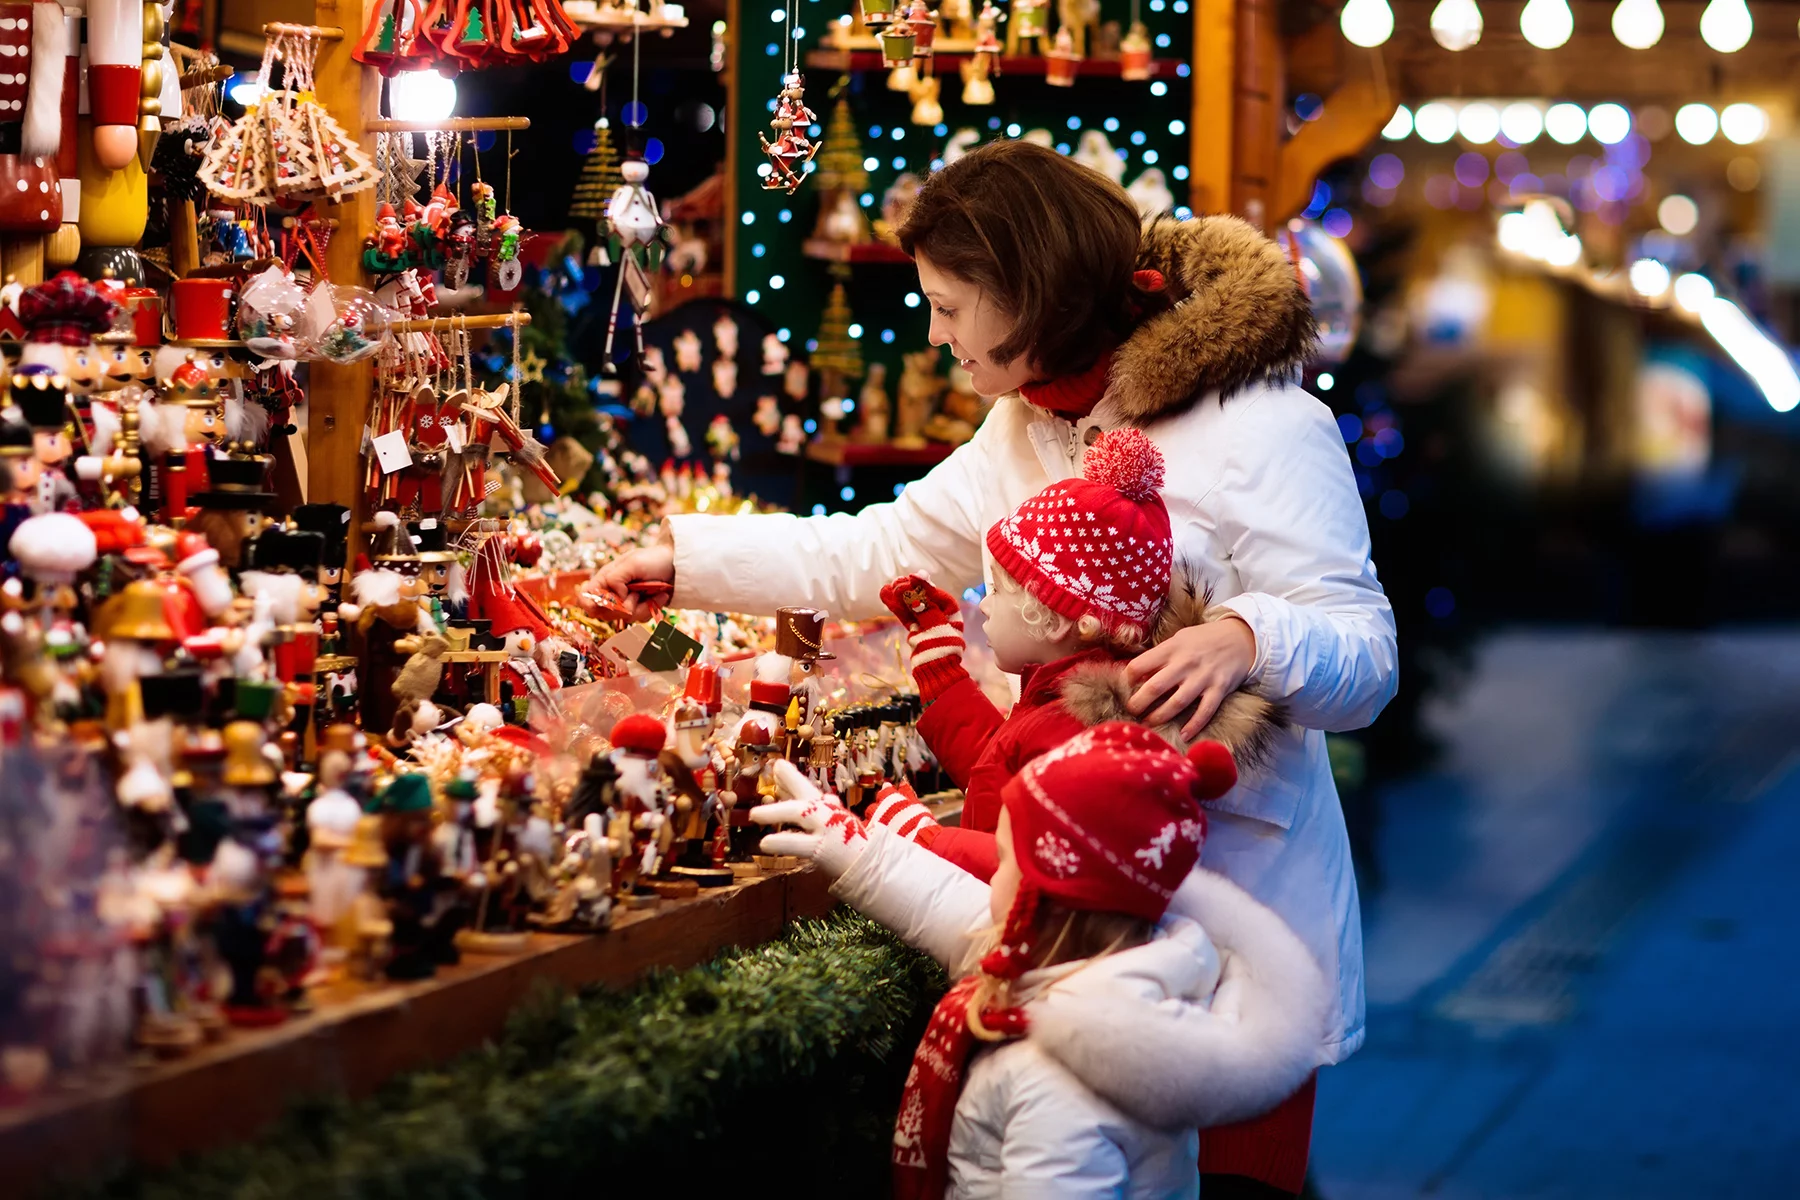 Child and mother looking at gifts at a Christmas market